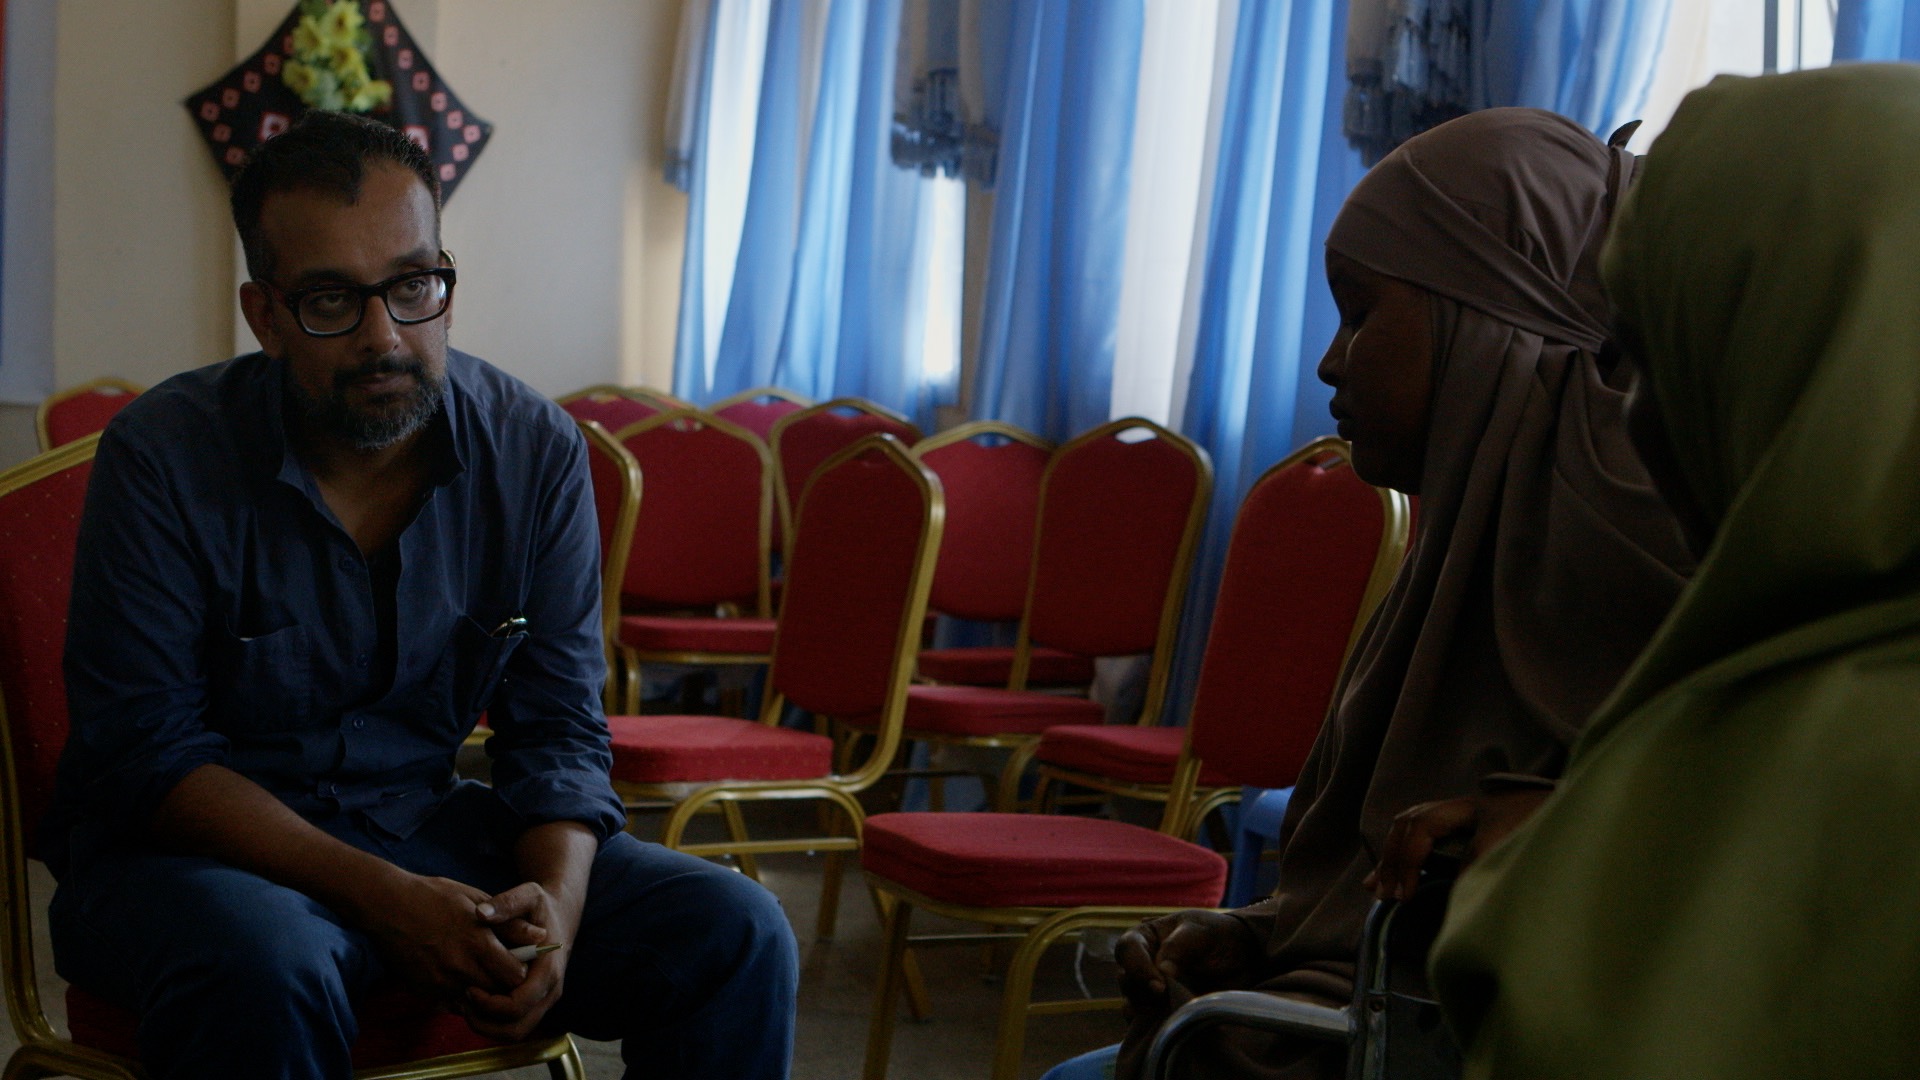 Suroosh meets women who were victims of al Shabaab’s violence, including some who were made amputees by their former husbands.